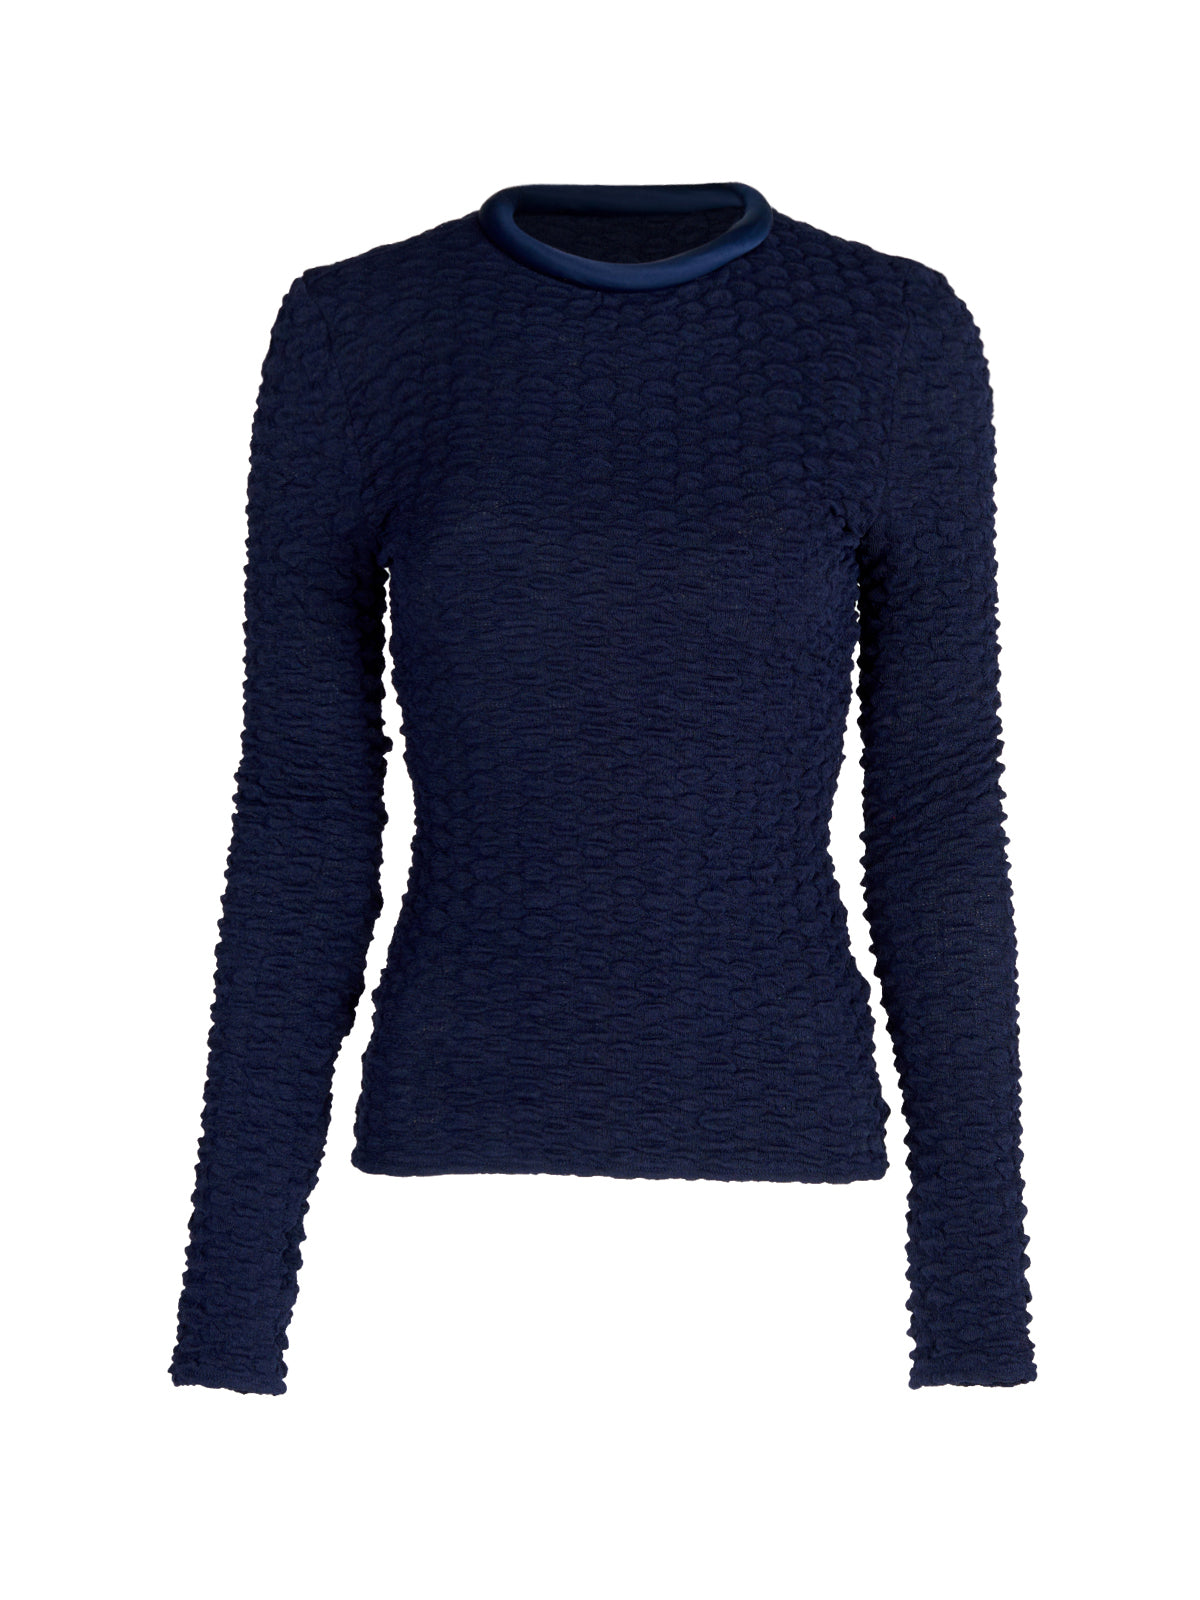 A women's long-sleeved Jari Top Navy, crafted from jacquard fabric, making it a versatile piece for Resort 2024.